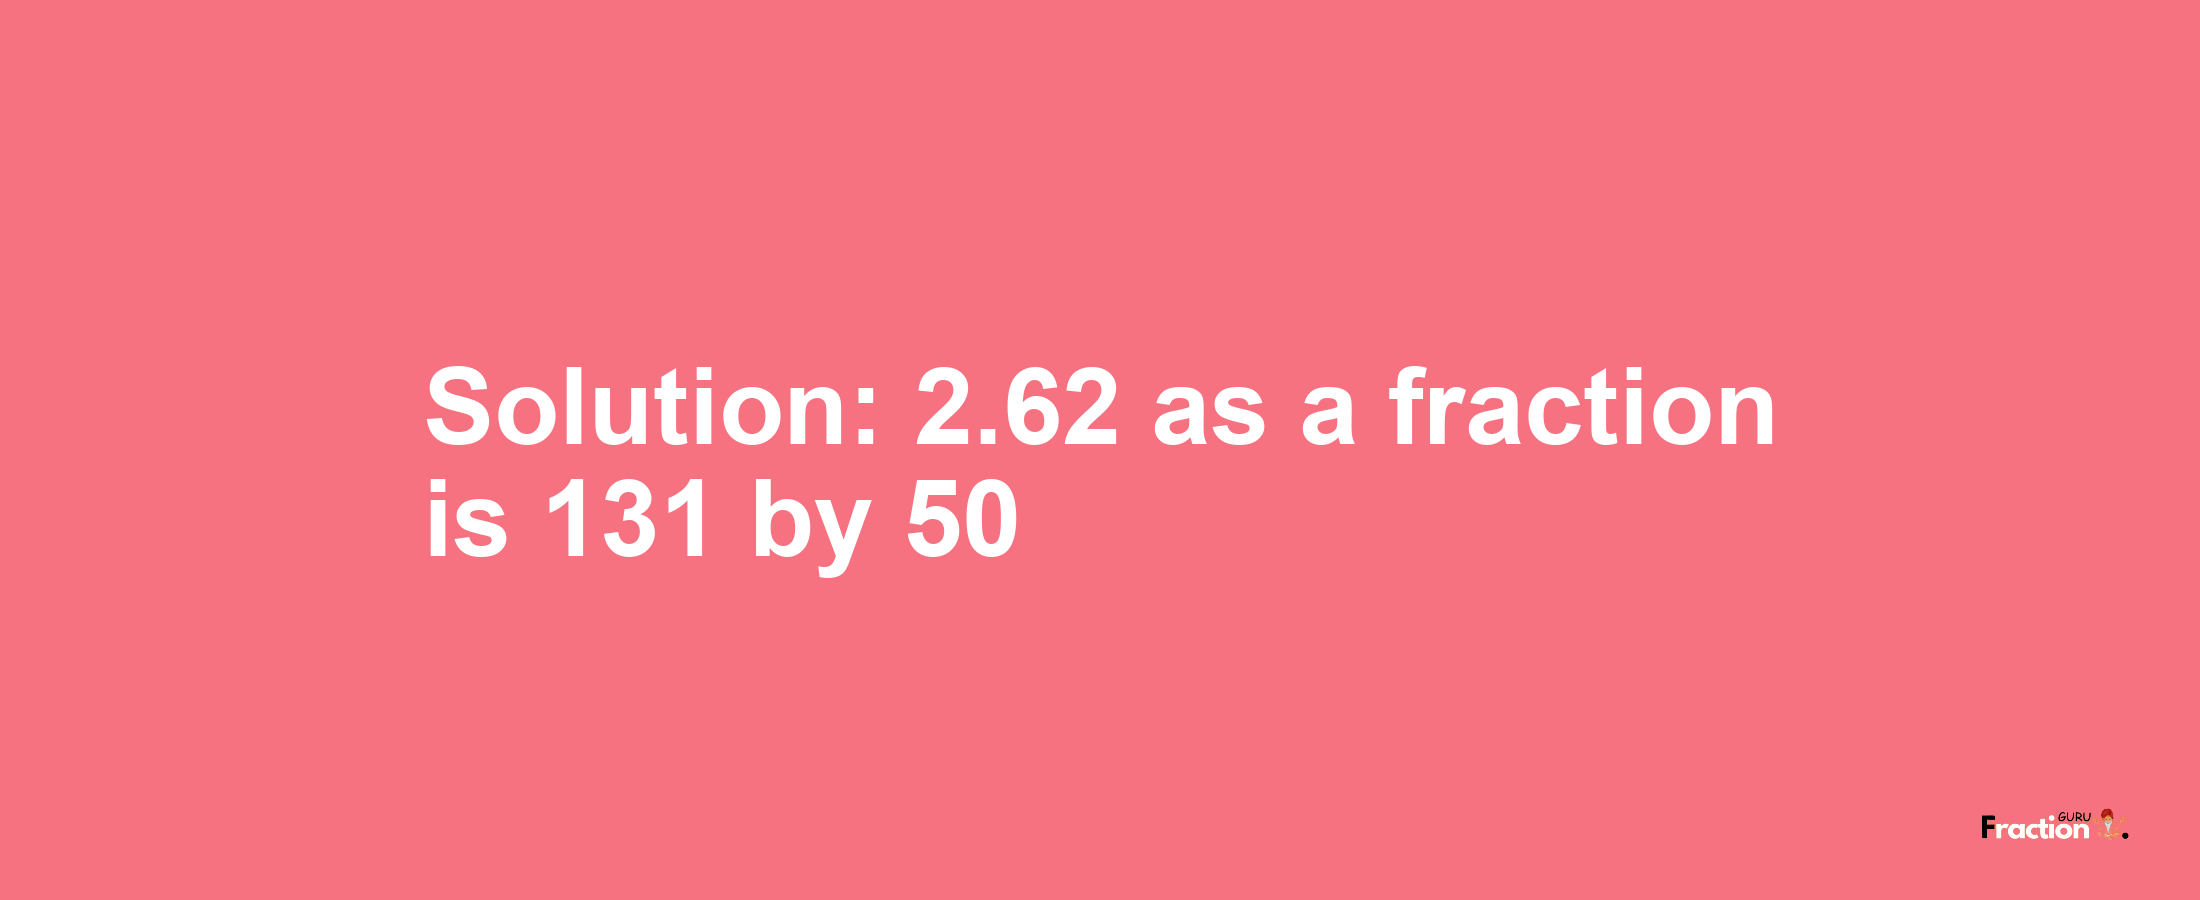 Solution:2.62 as a fraction is 131/50